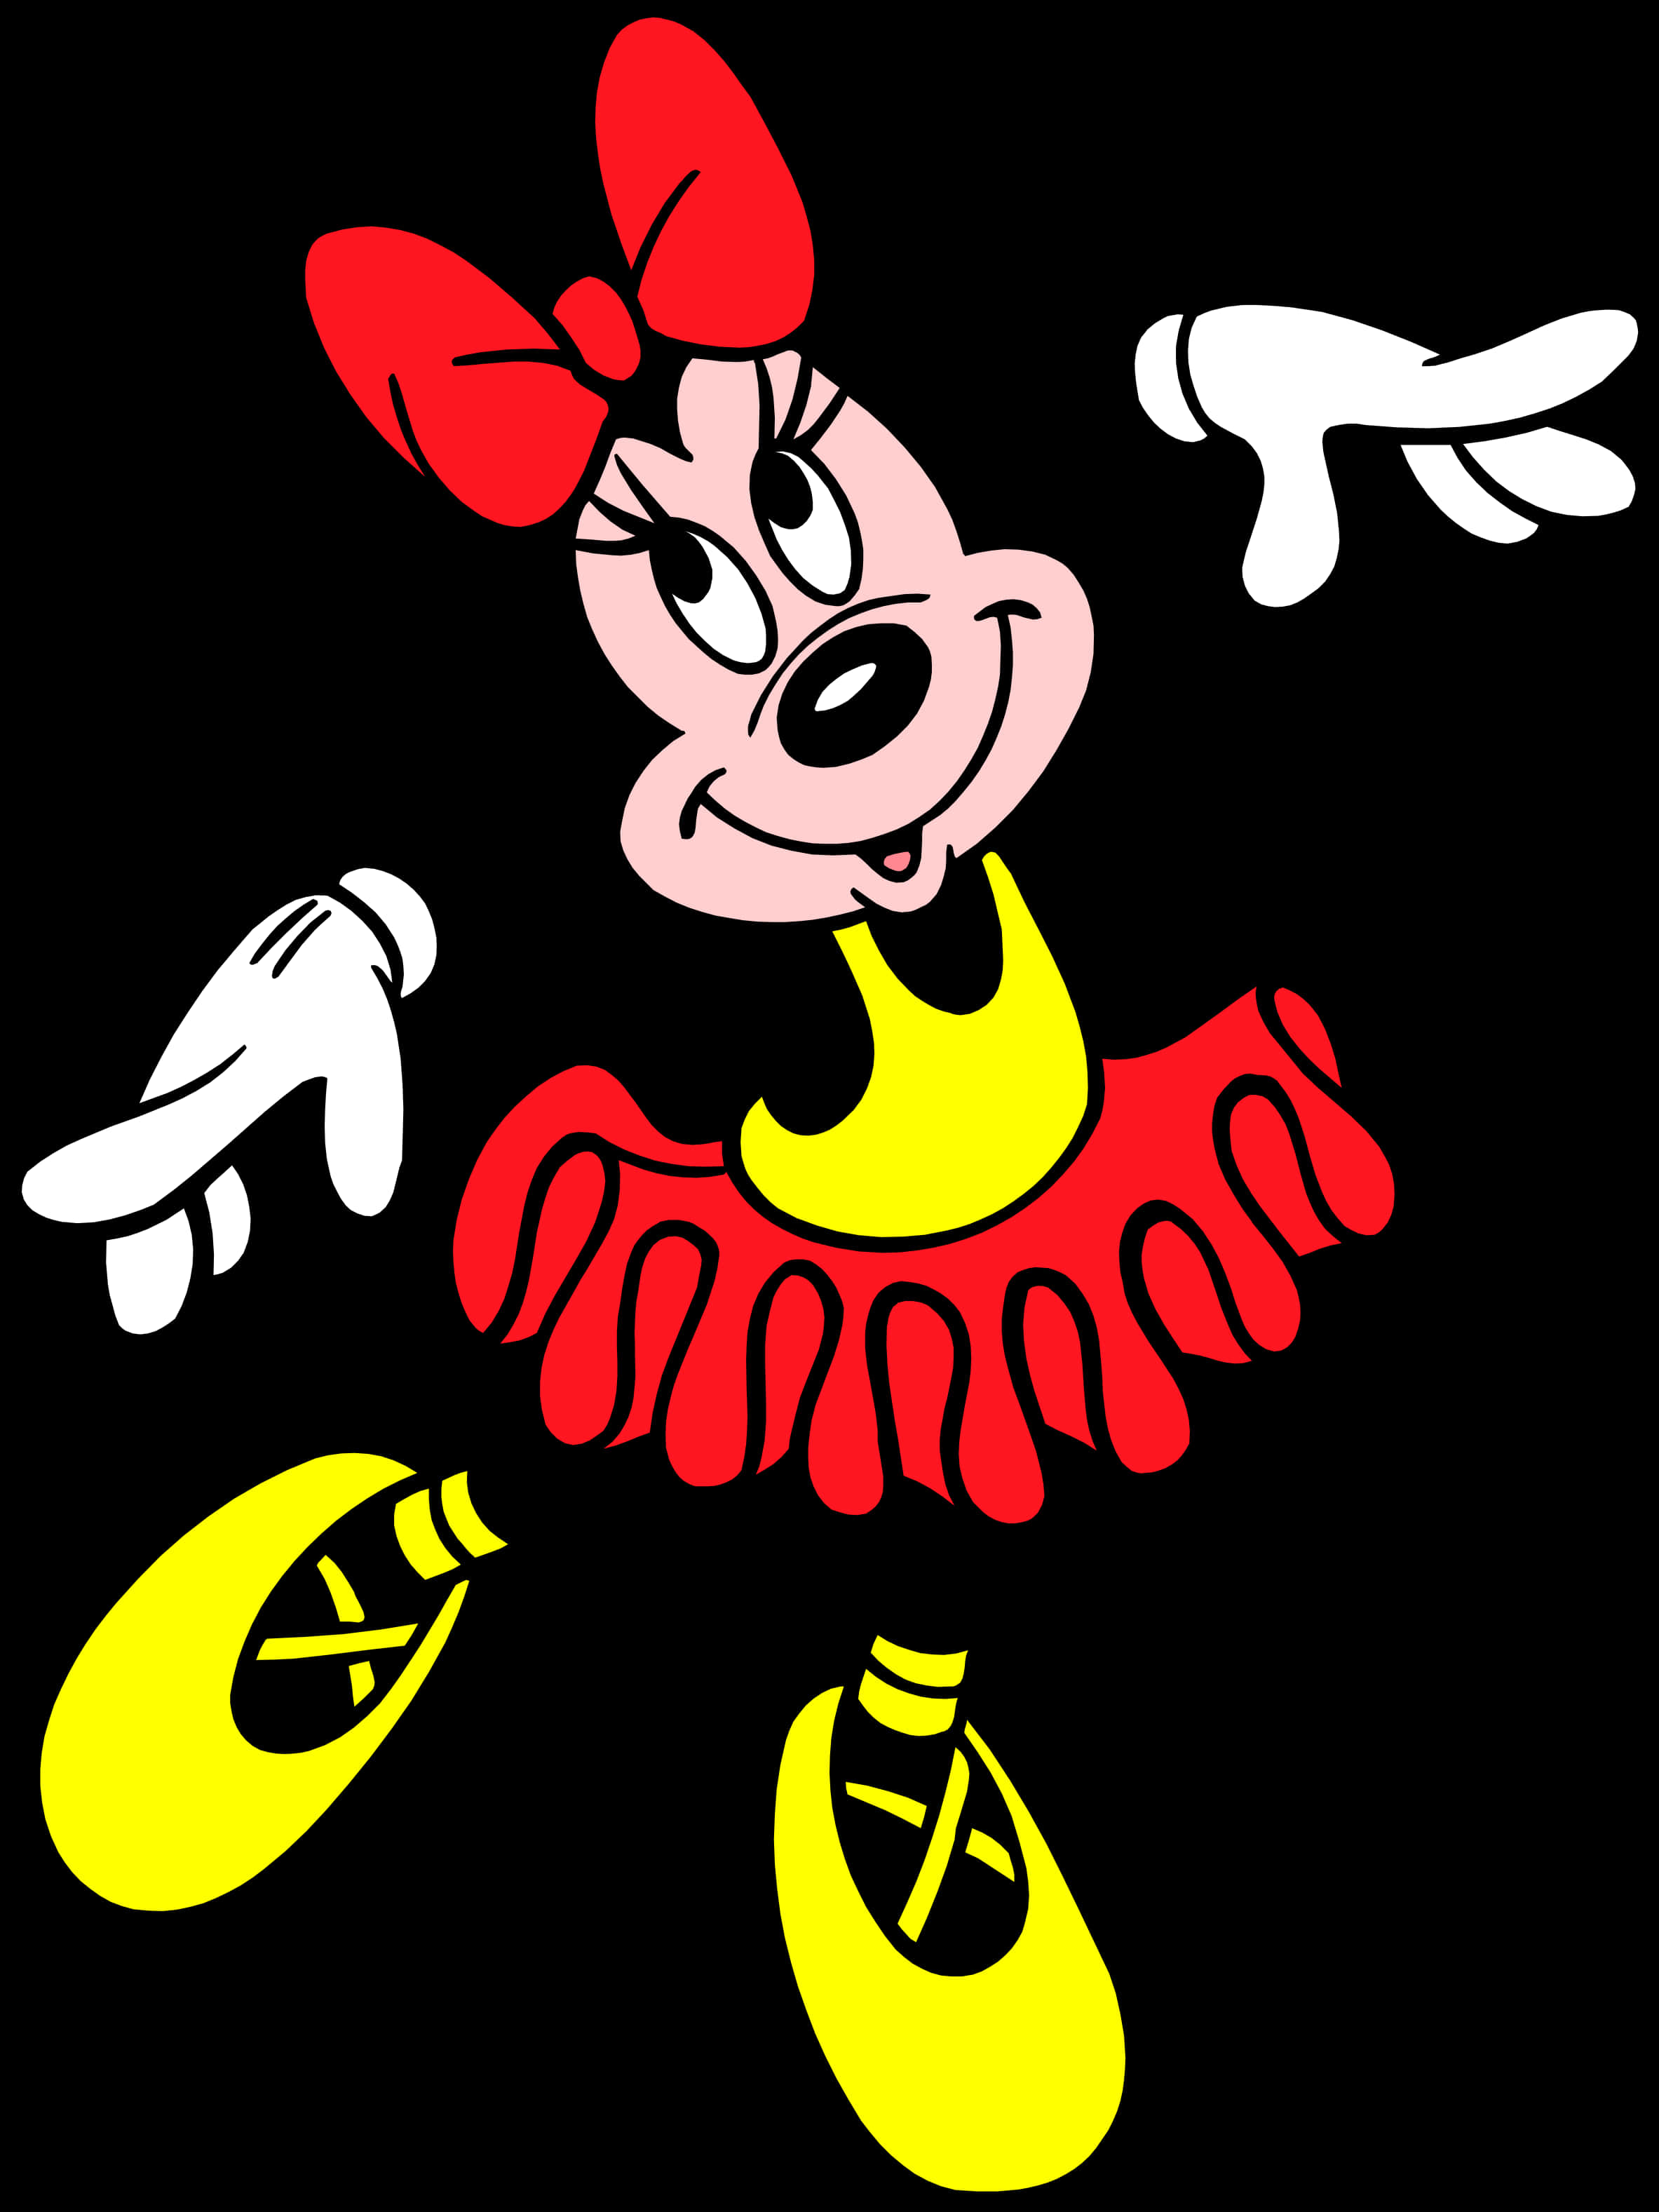 Classic Minnie Mouse Illustration